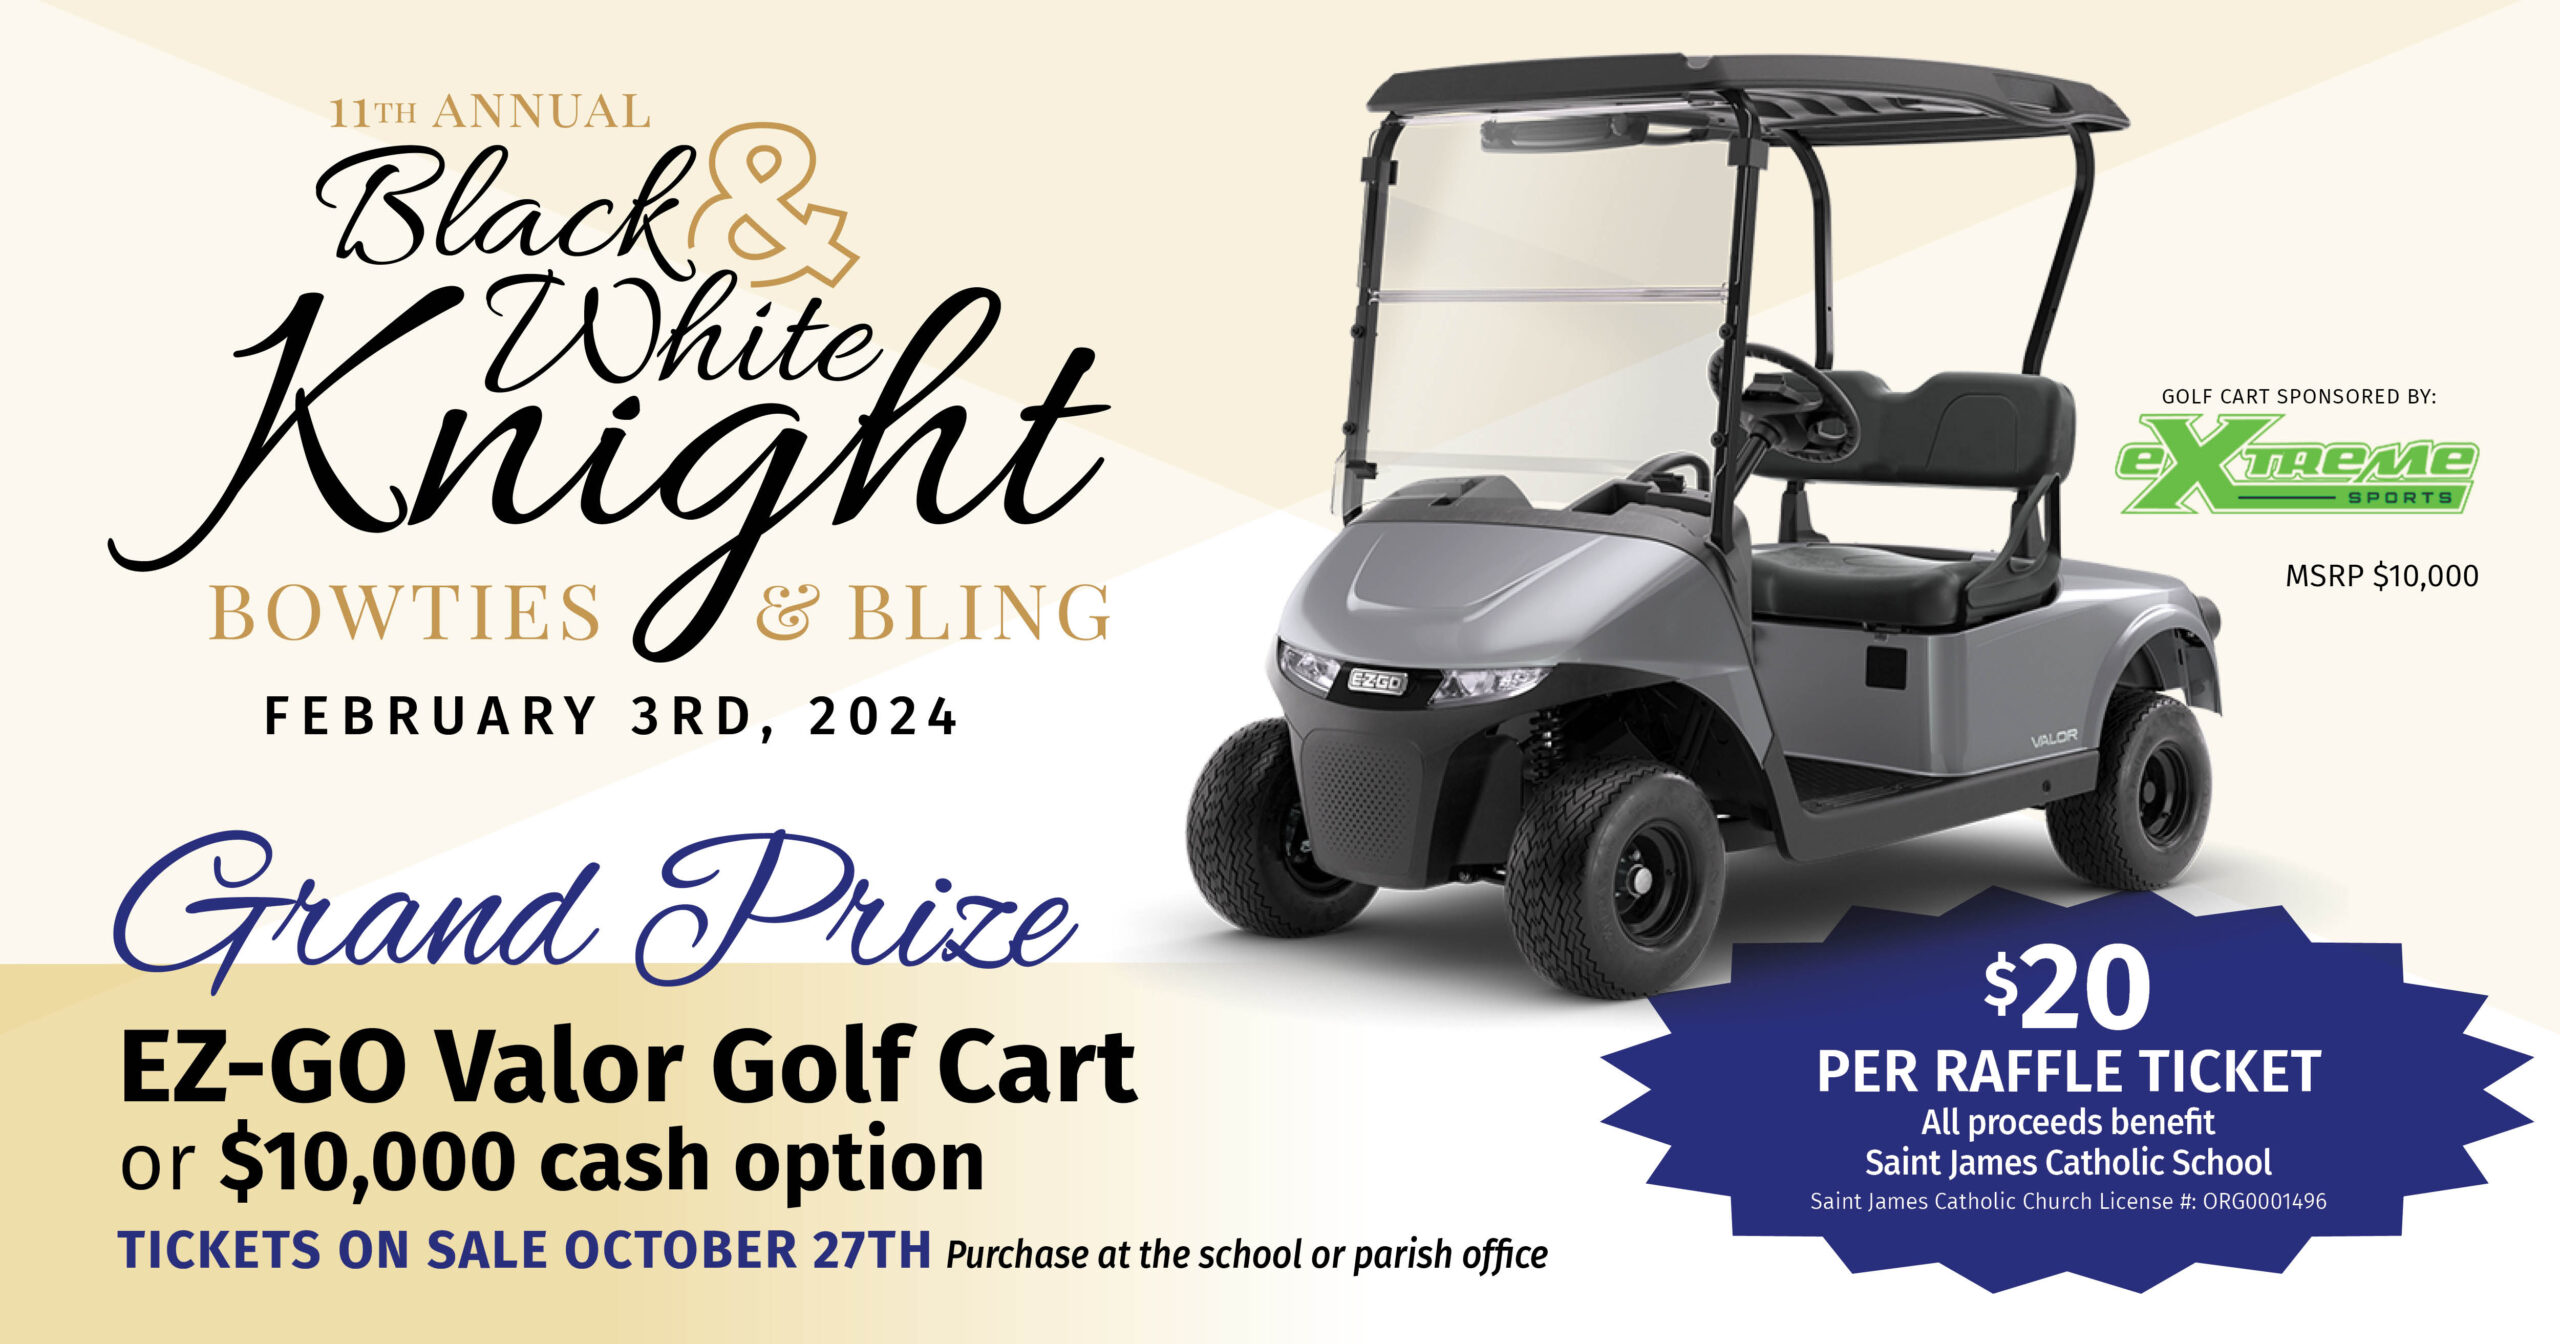 11th annual Black & White Knight Bowties & Bling Feb. 3rd, 2024
Grand Prize: EZ-GO Valor Golf Cart or $10,000 cash option
Tickets on sale Oct. 27th, purchase at school or parish office.
$20 per raffle ticket. All proceeds benefit St. James Catholic School.
St. James Catholic Church License #: ORG0001496